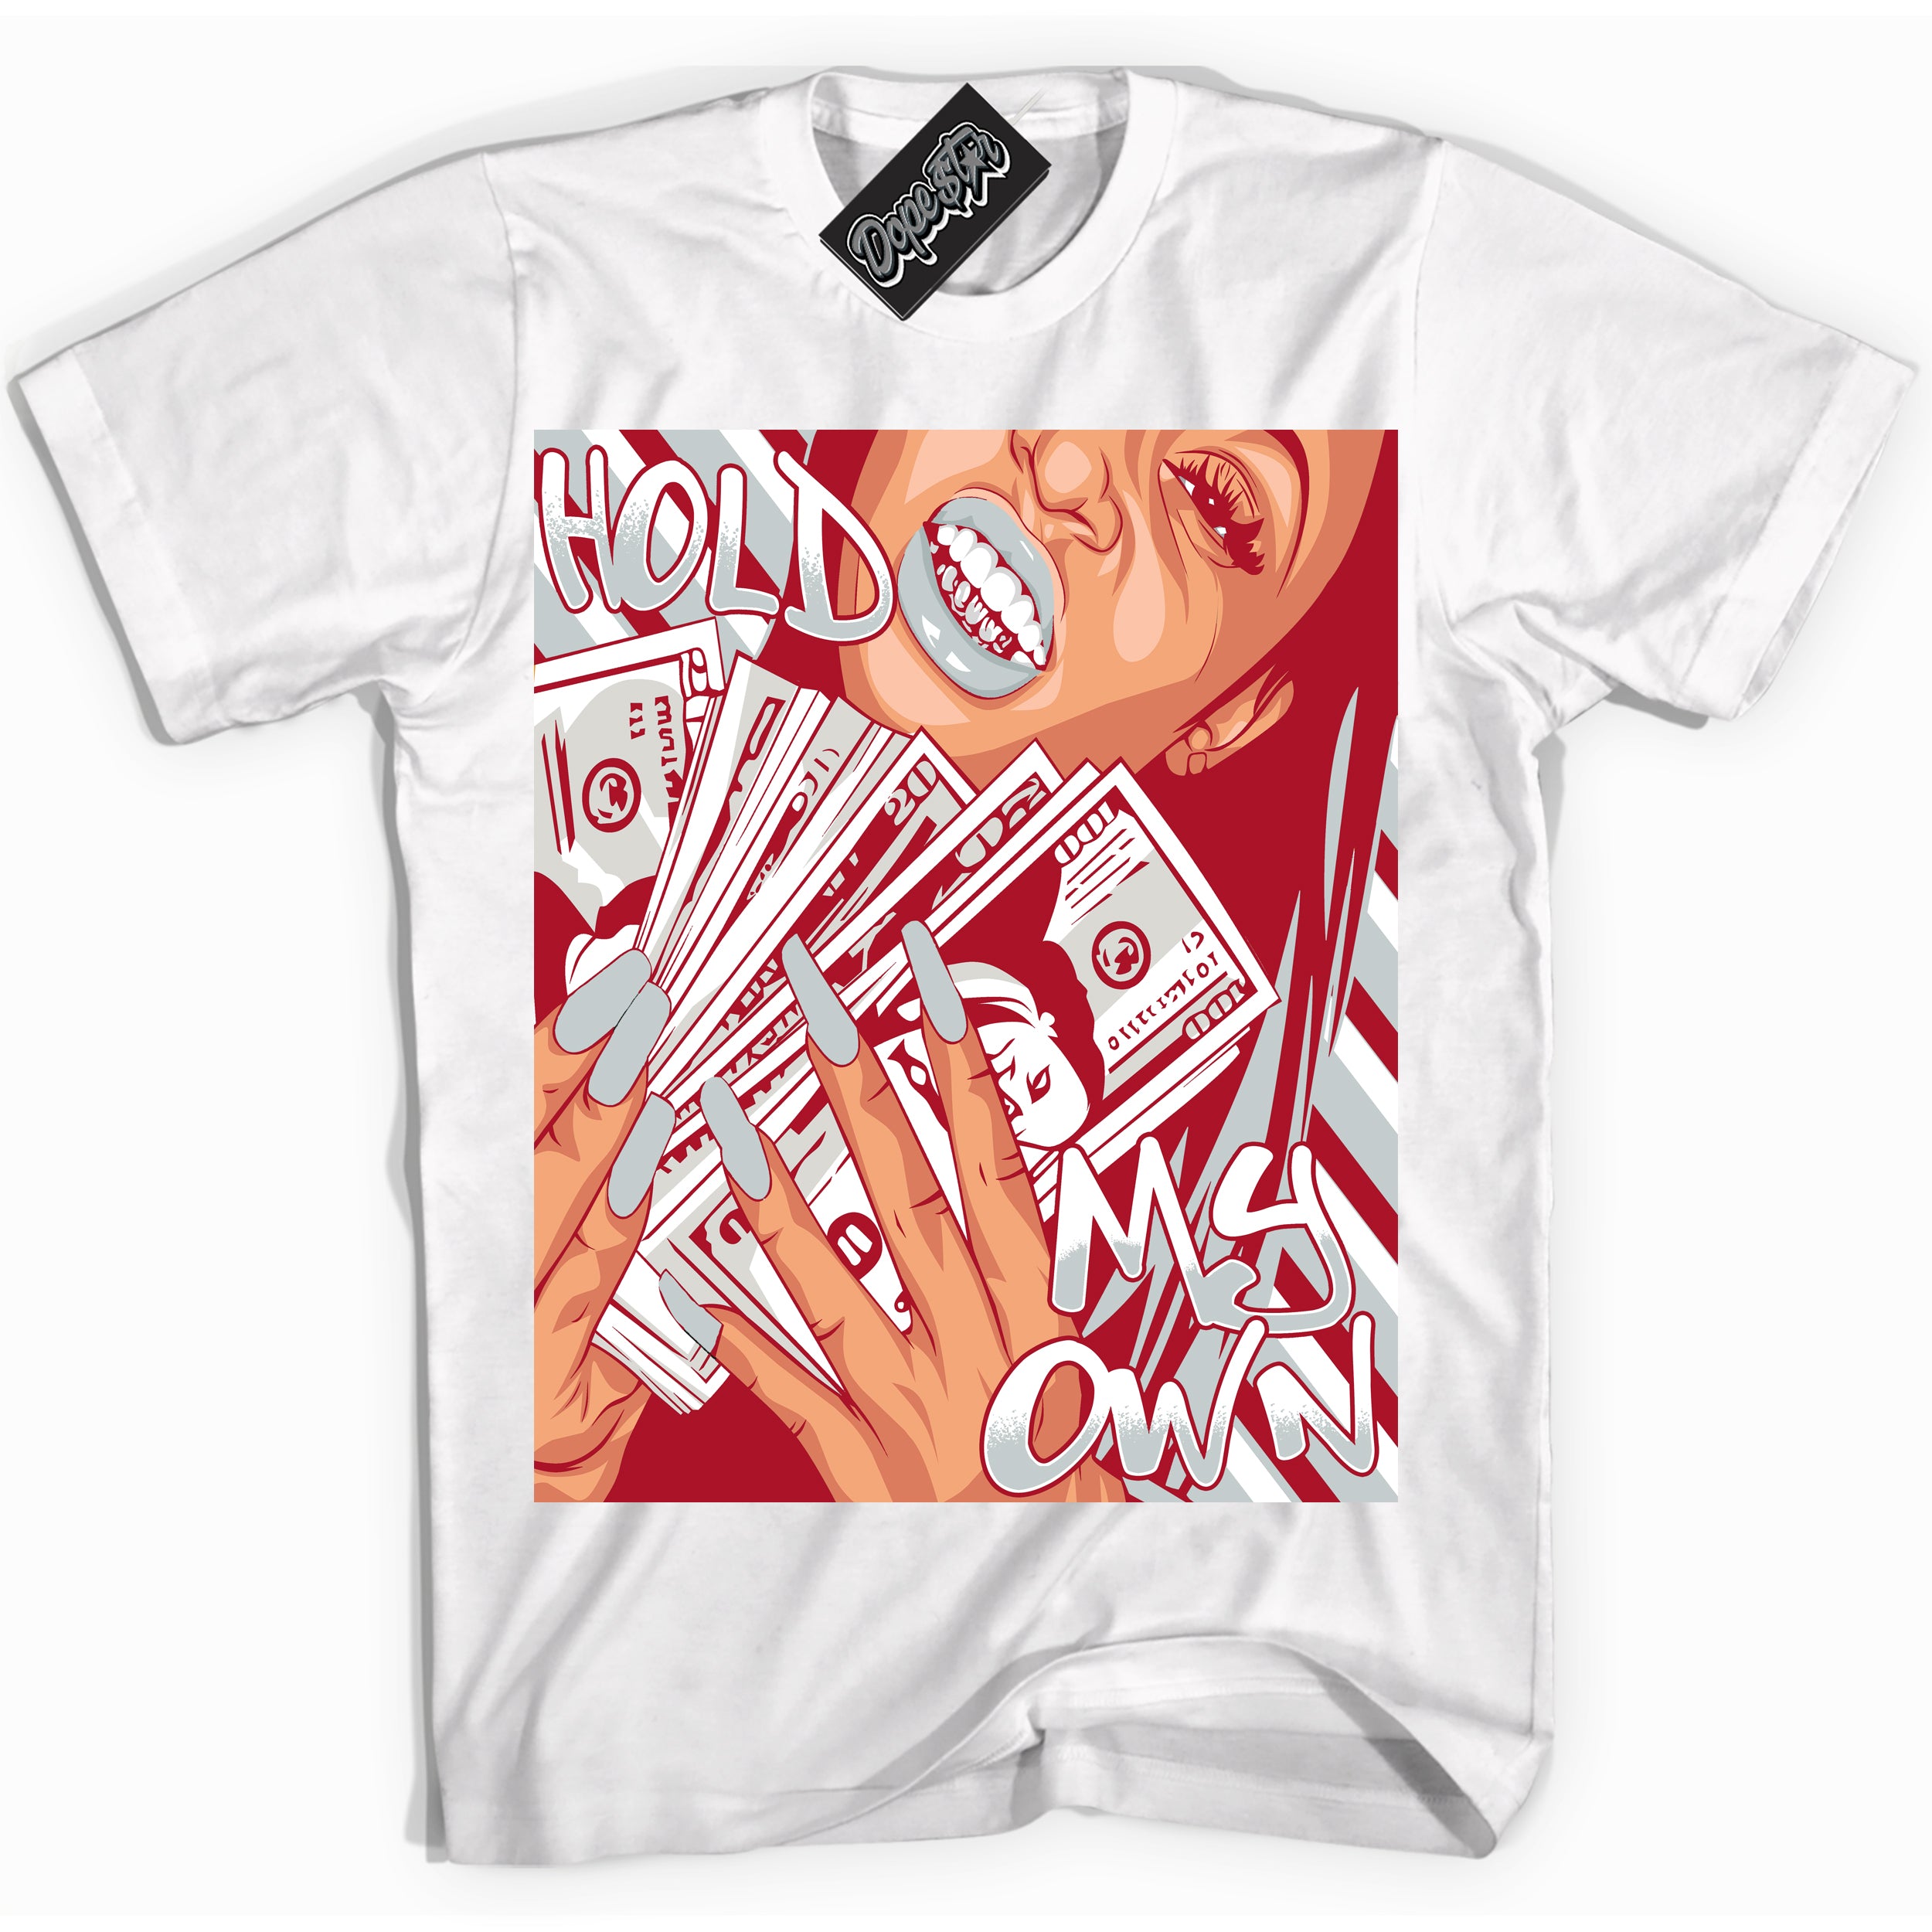 Cool White Shirt with “ Hold My Own” design that perfectly matches Reverse Ultraman Sneakers.